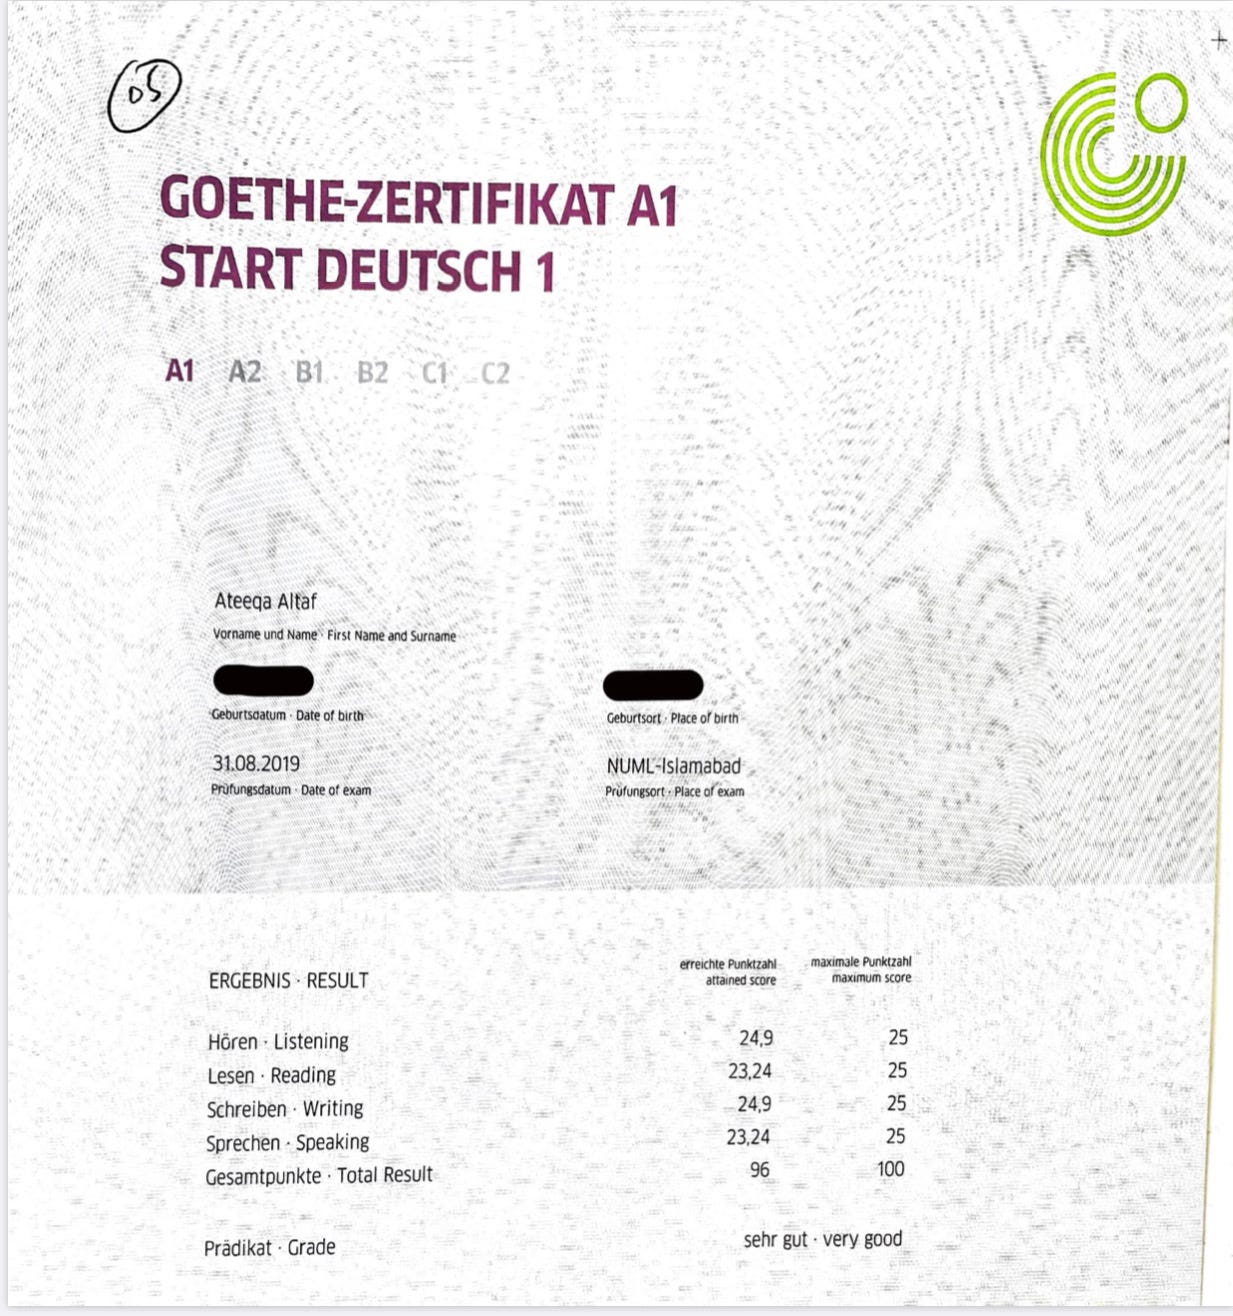 How To Prepare For German Language A1 Spouse Family Reunion Visa By Ateeqa Altaf Medium